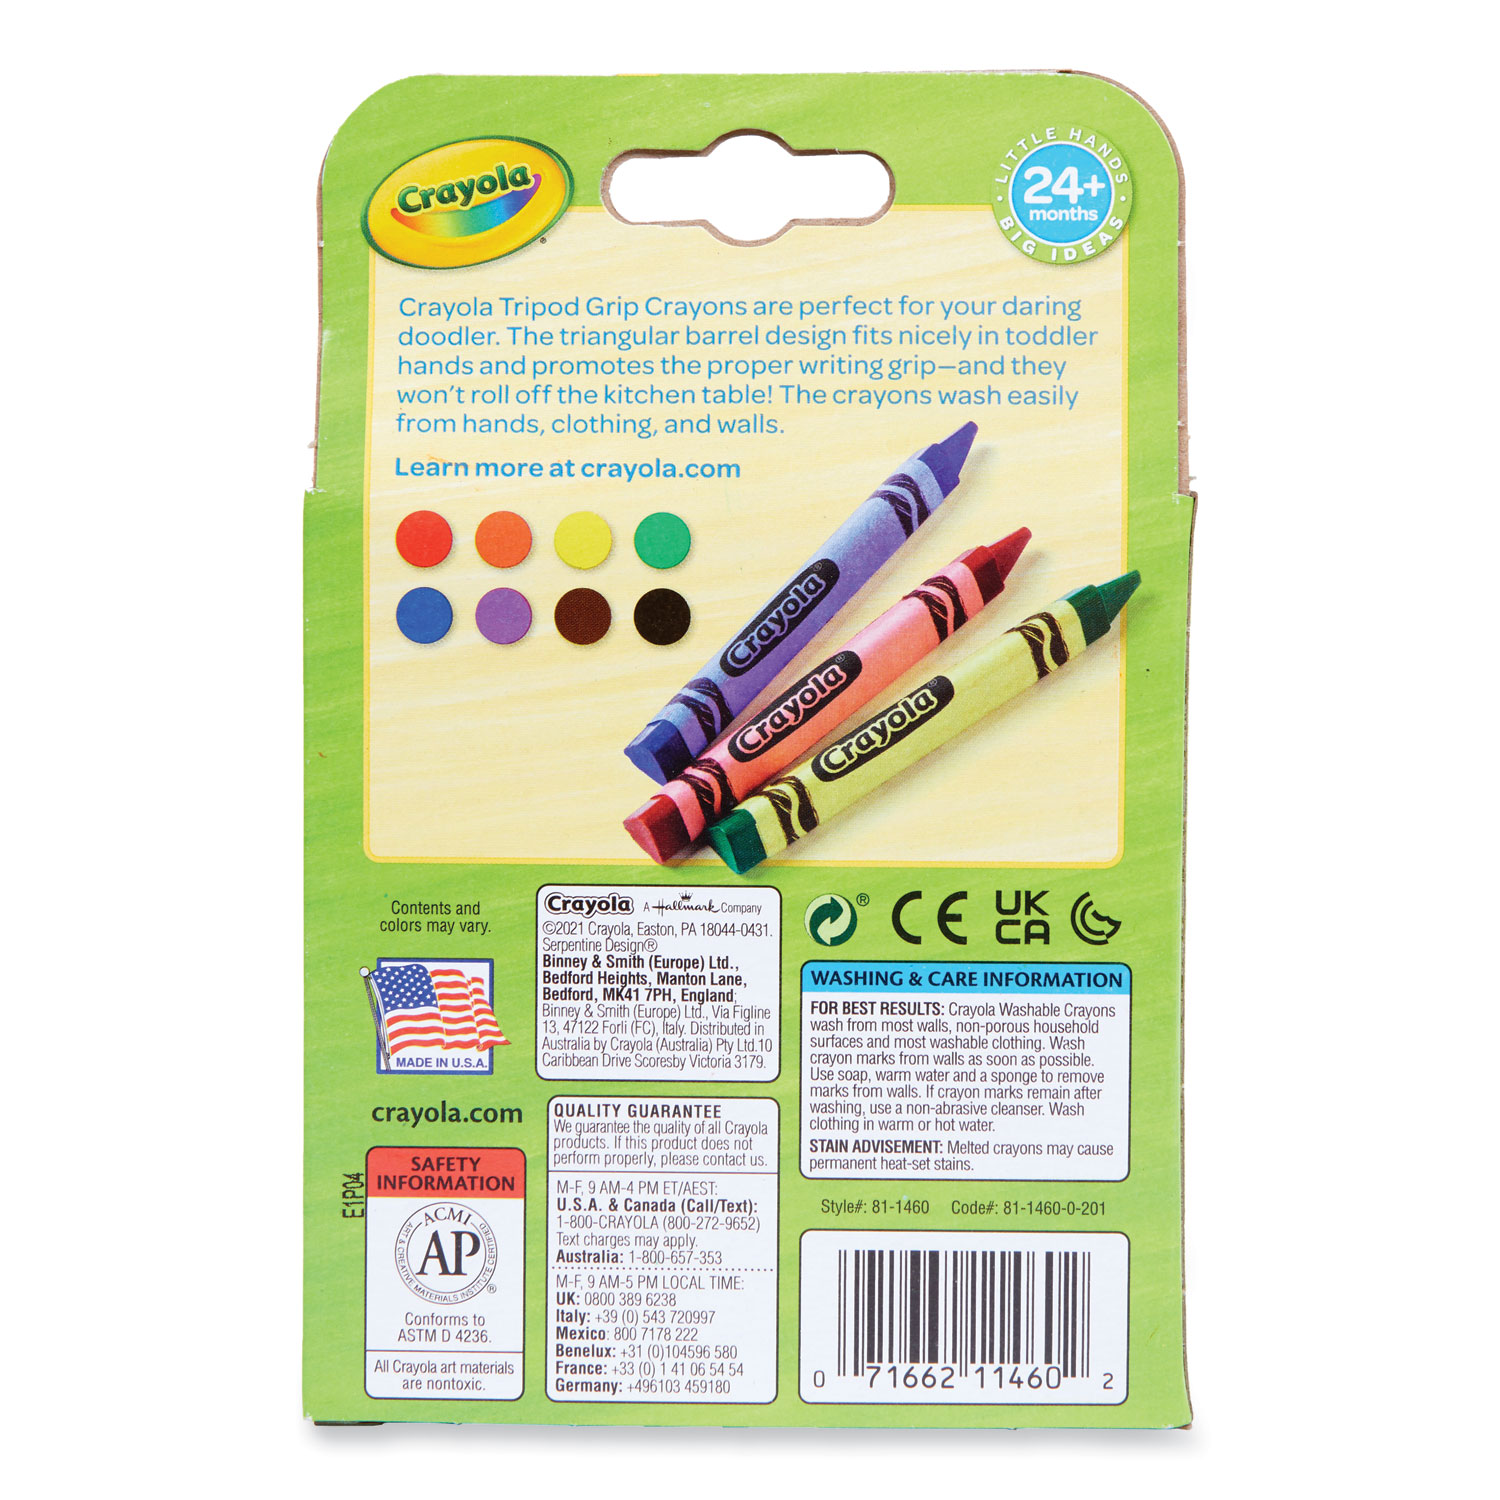 Crayola My First Crayola Classpack Tripod Grip Washable Markers at